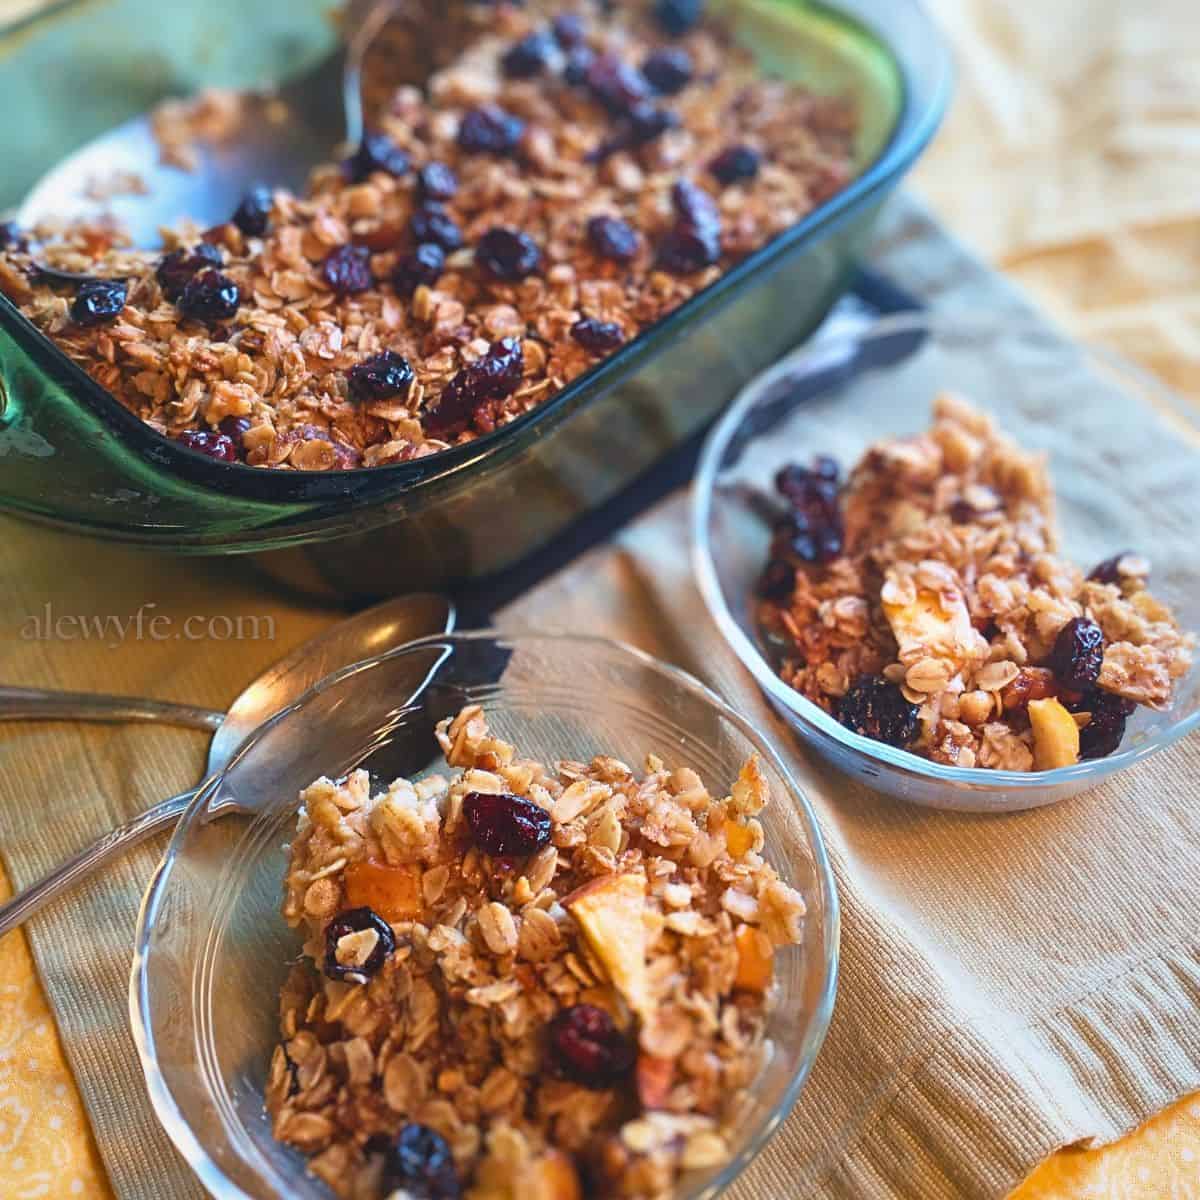 a green glass pyrex dish with baked apple cranberry walnut oatmeal, with two clear glass bowls of baked oats and silver spoons in the foreground.